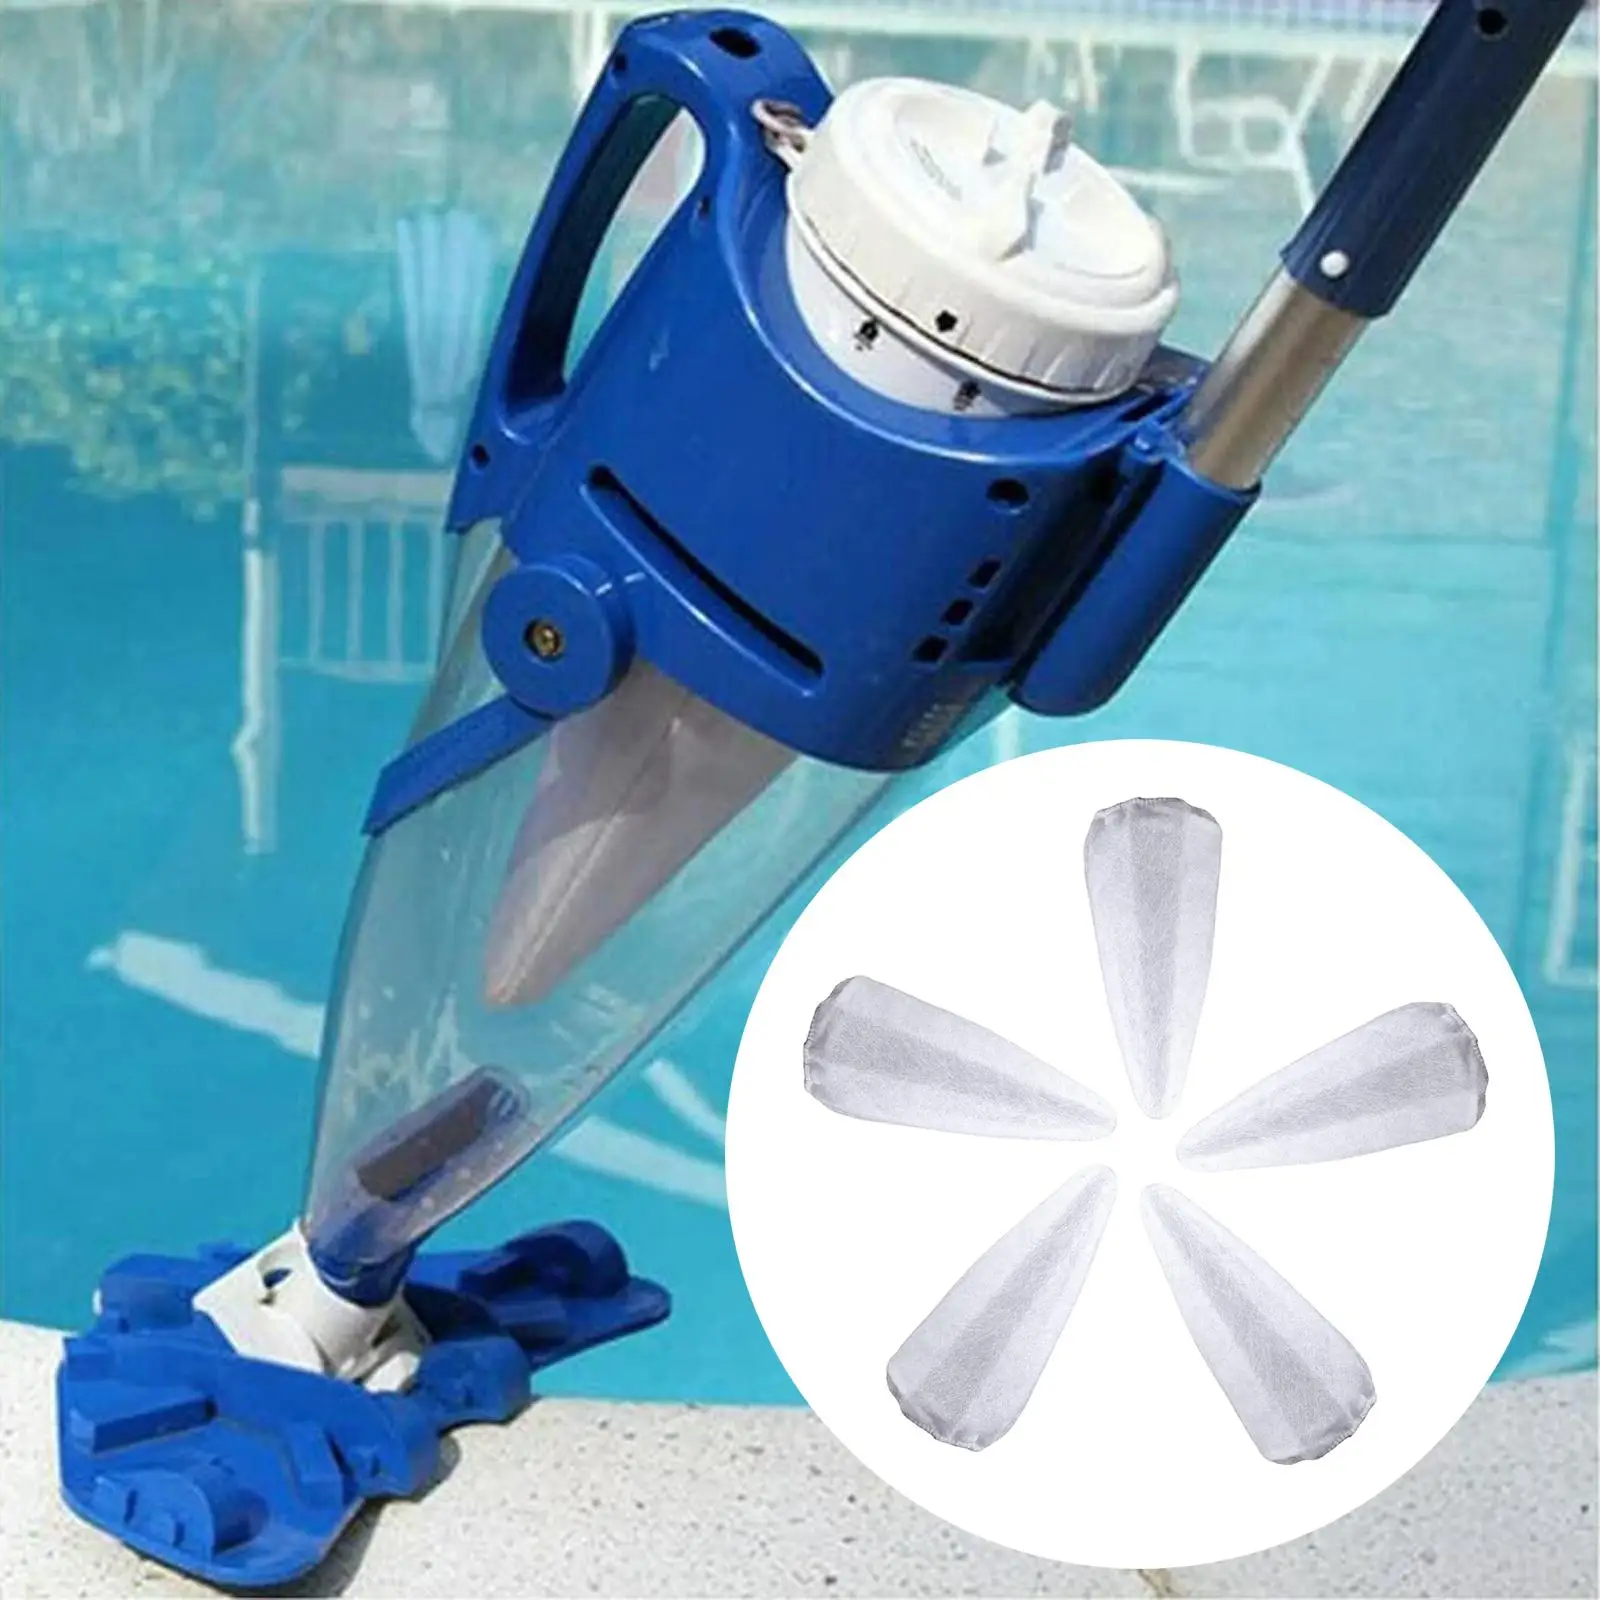 5 x Vacuum Filter Replacements Pool Filter Reusable Cotton Filter Bag Sand and Silt Pool Vacuum Filter Bag for Pool Vacuum